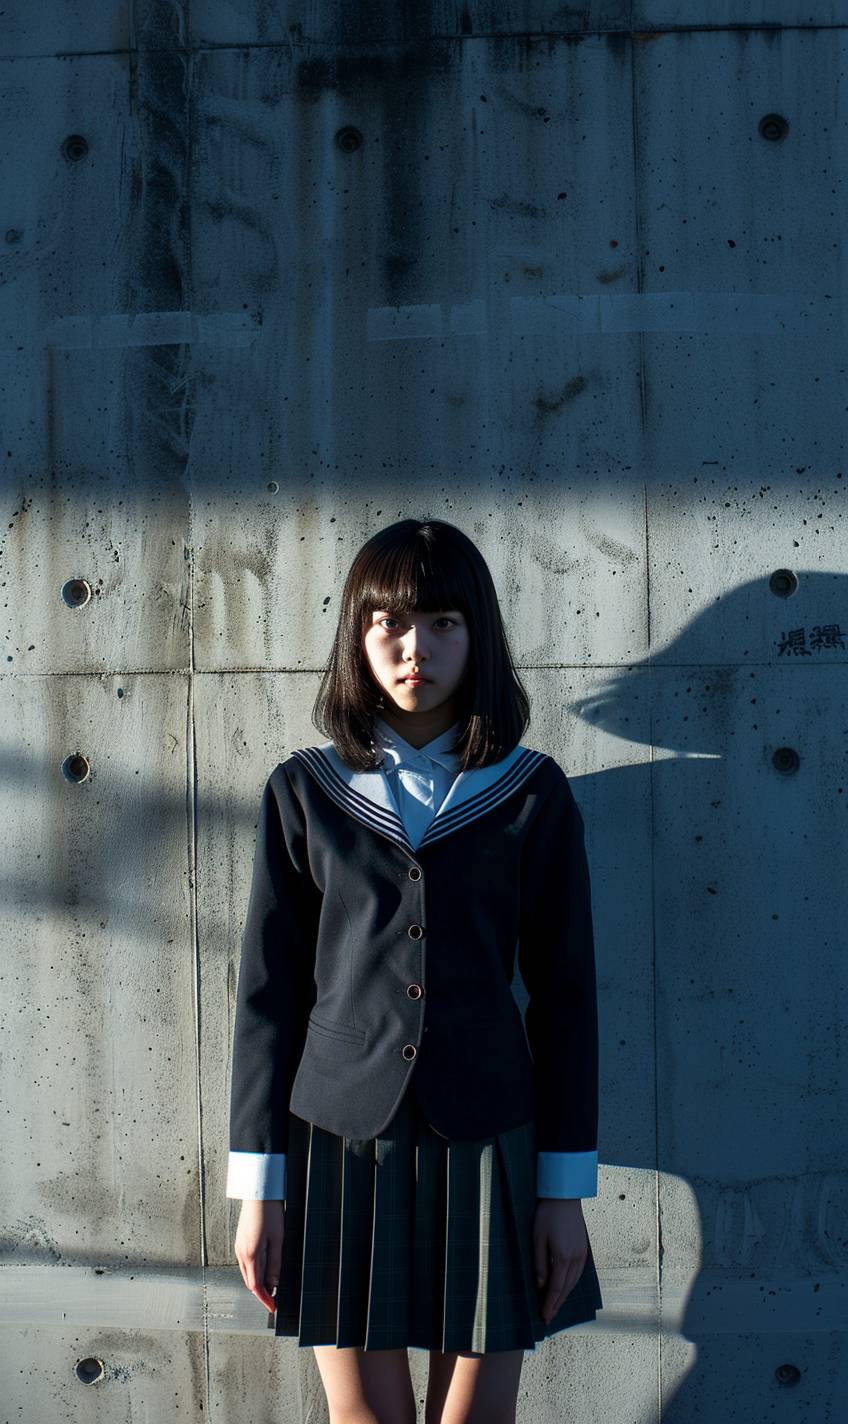 High resolution full color photo of a young woman in a Japanese schoolgirl uniform standing against a concrete wall. She has a confident and defiant pose. Her shadow is prominently cast on the wall behind her, adding to the dramatic effect. The background includes a textured concrete wall surface and a clean, urban environment, enhancing the bold, statement feel of the image.